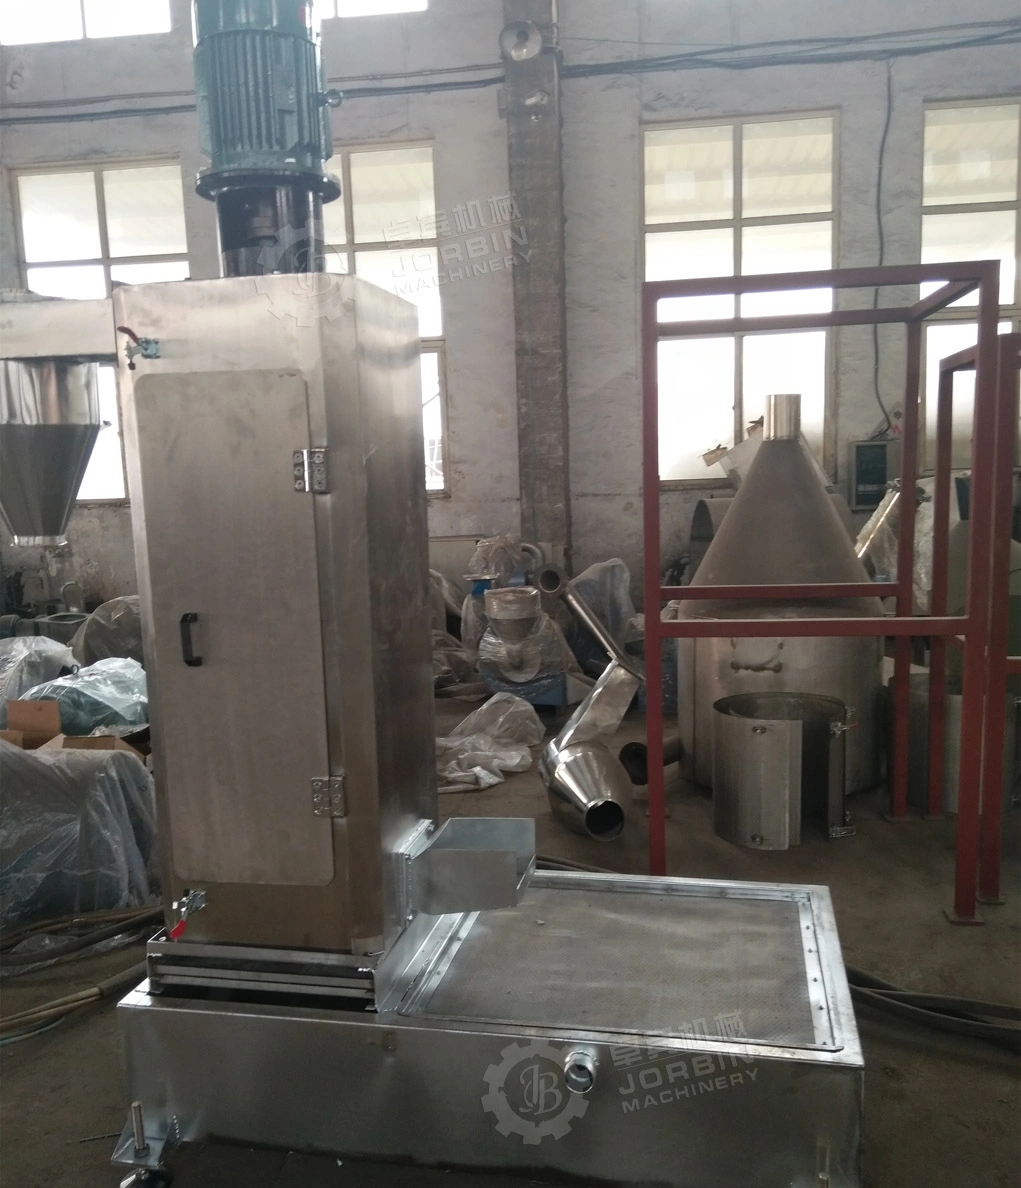 Plastic Recycling Two Stage Extruder Pelletizer/Granulation Machine